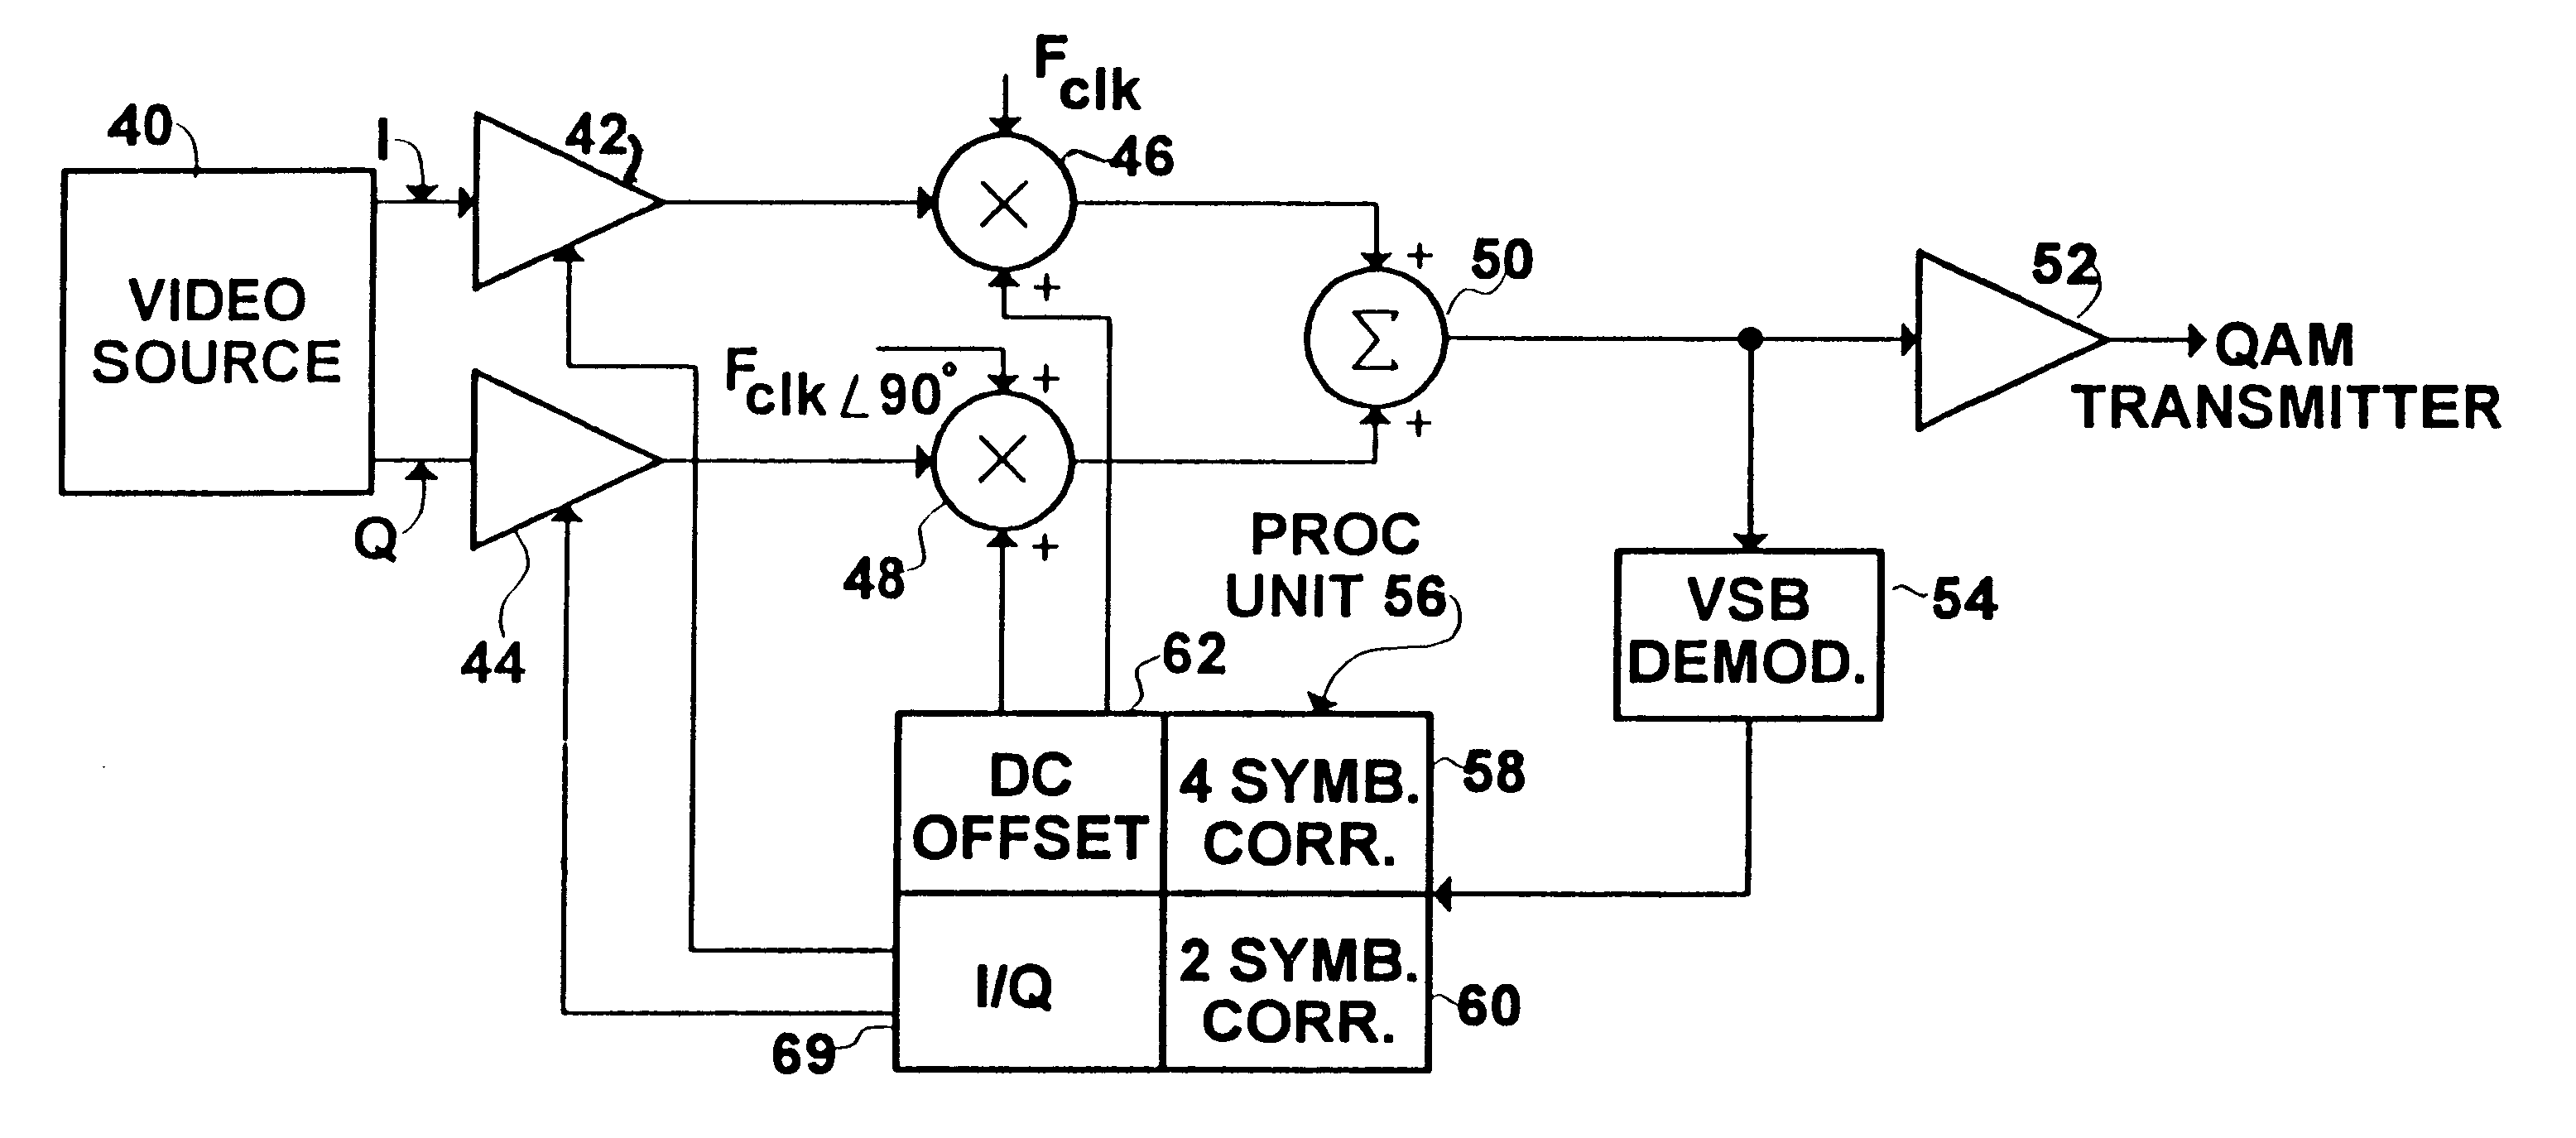 Removal of clock related artifacts from an offset QAM generated VSB signal